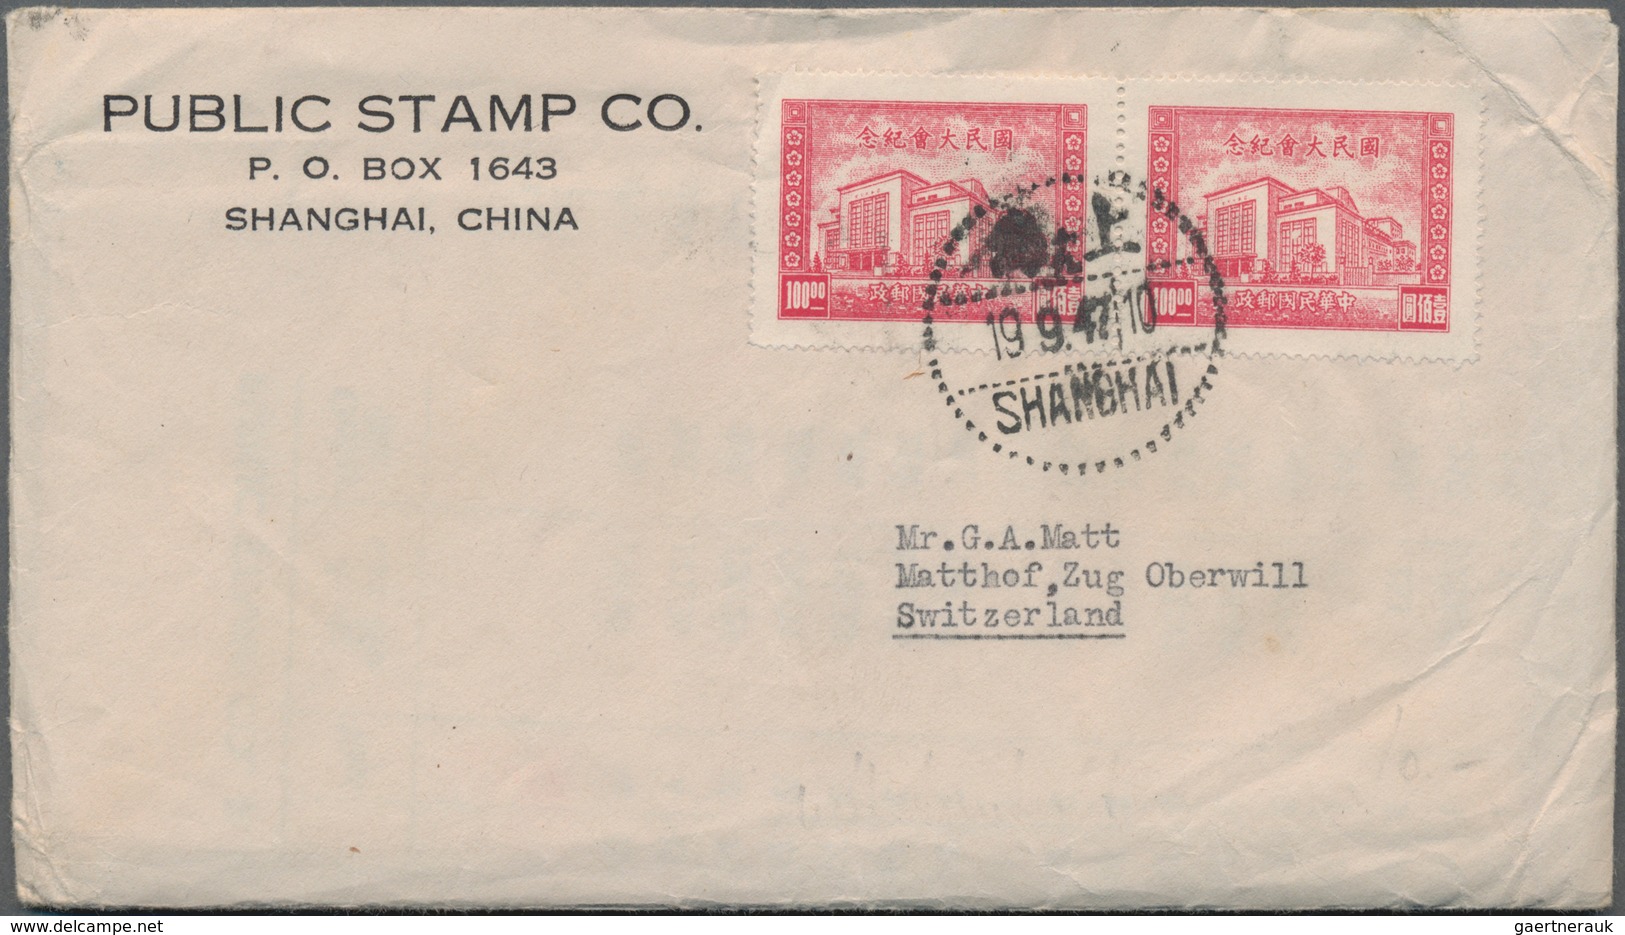 China: 1945/49, commemoratives on covers (11) or FDC (5) or FFC (4) inc. red hs. "O.A.T.", national